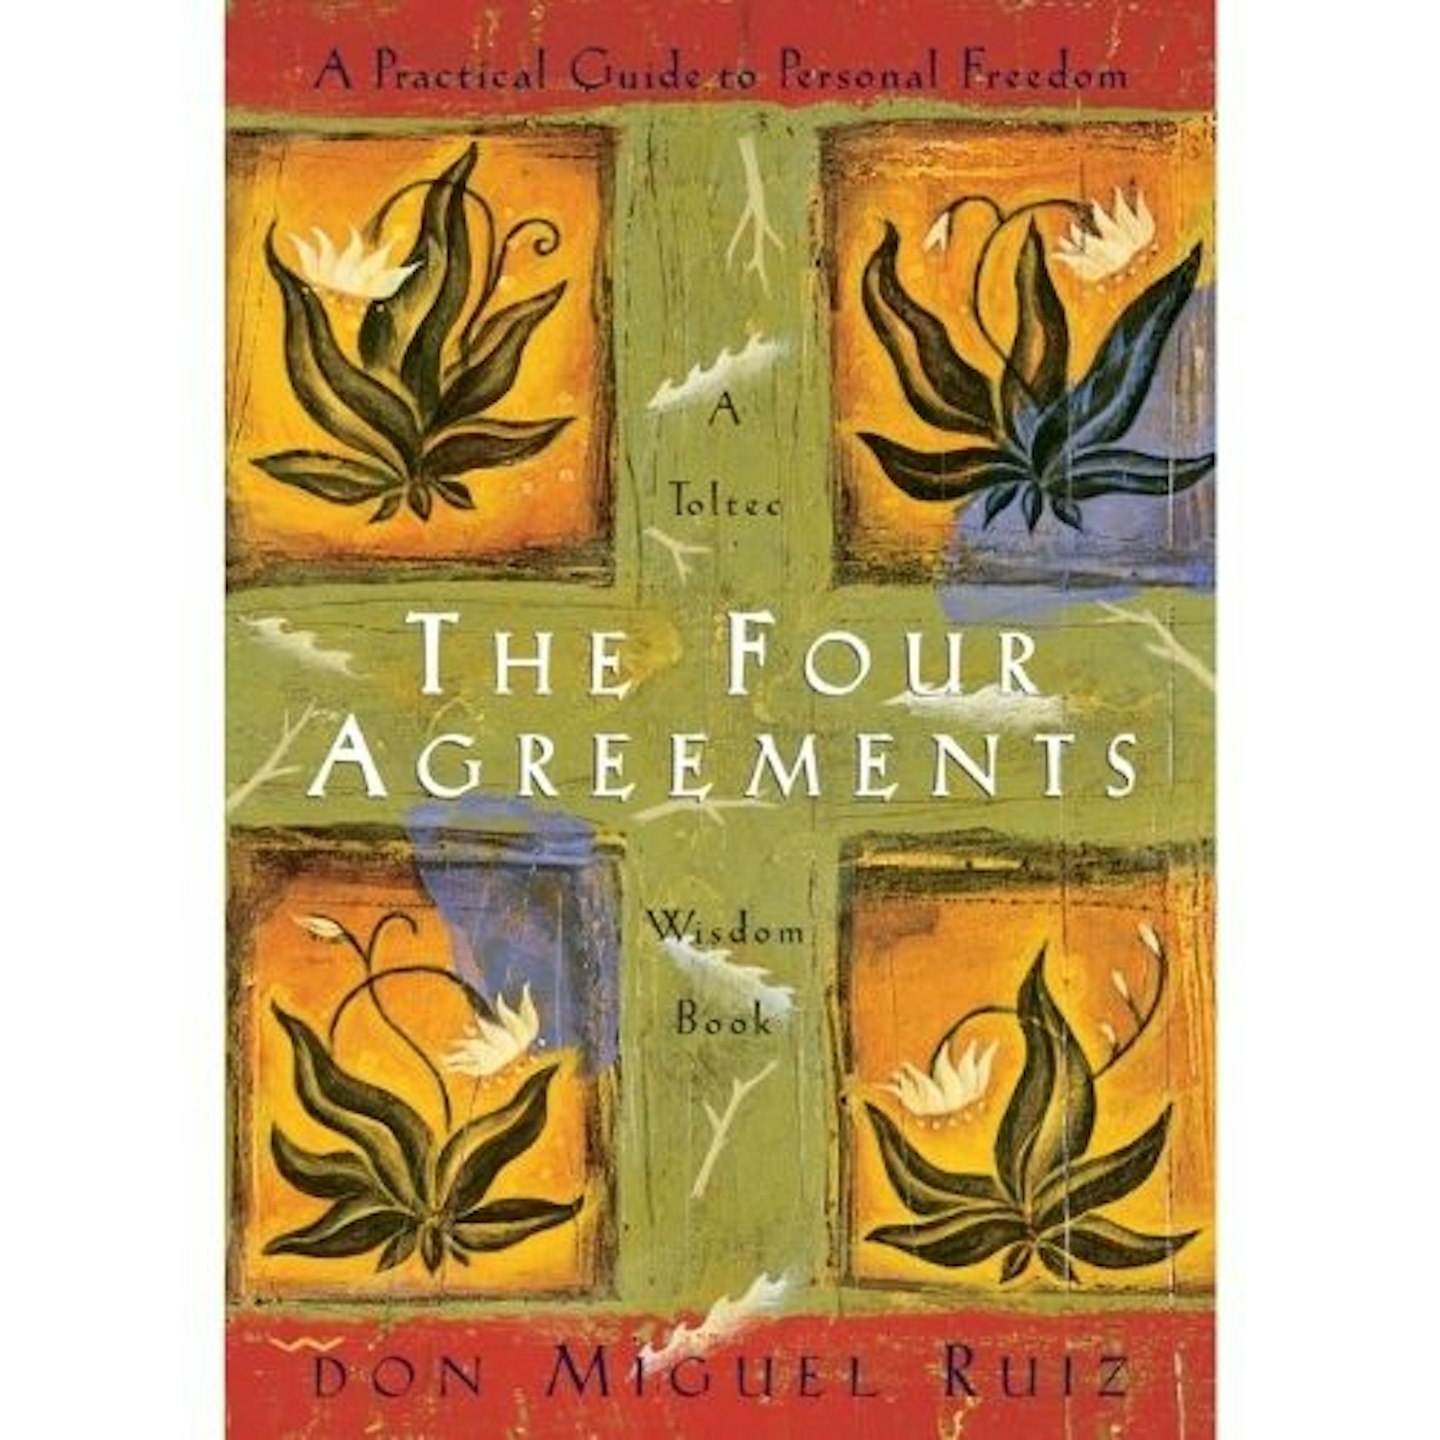 The Four Agreements by Don Miguel Ruiz 